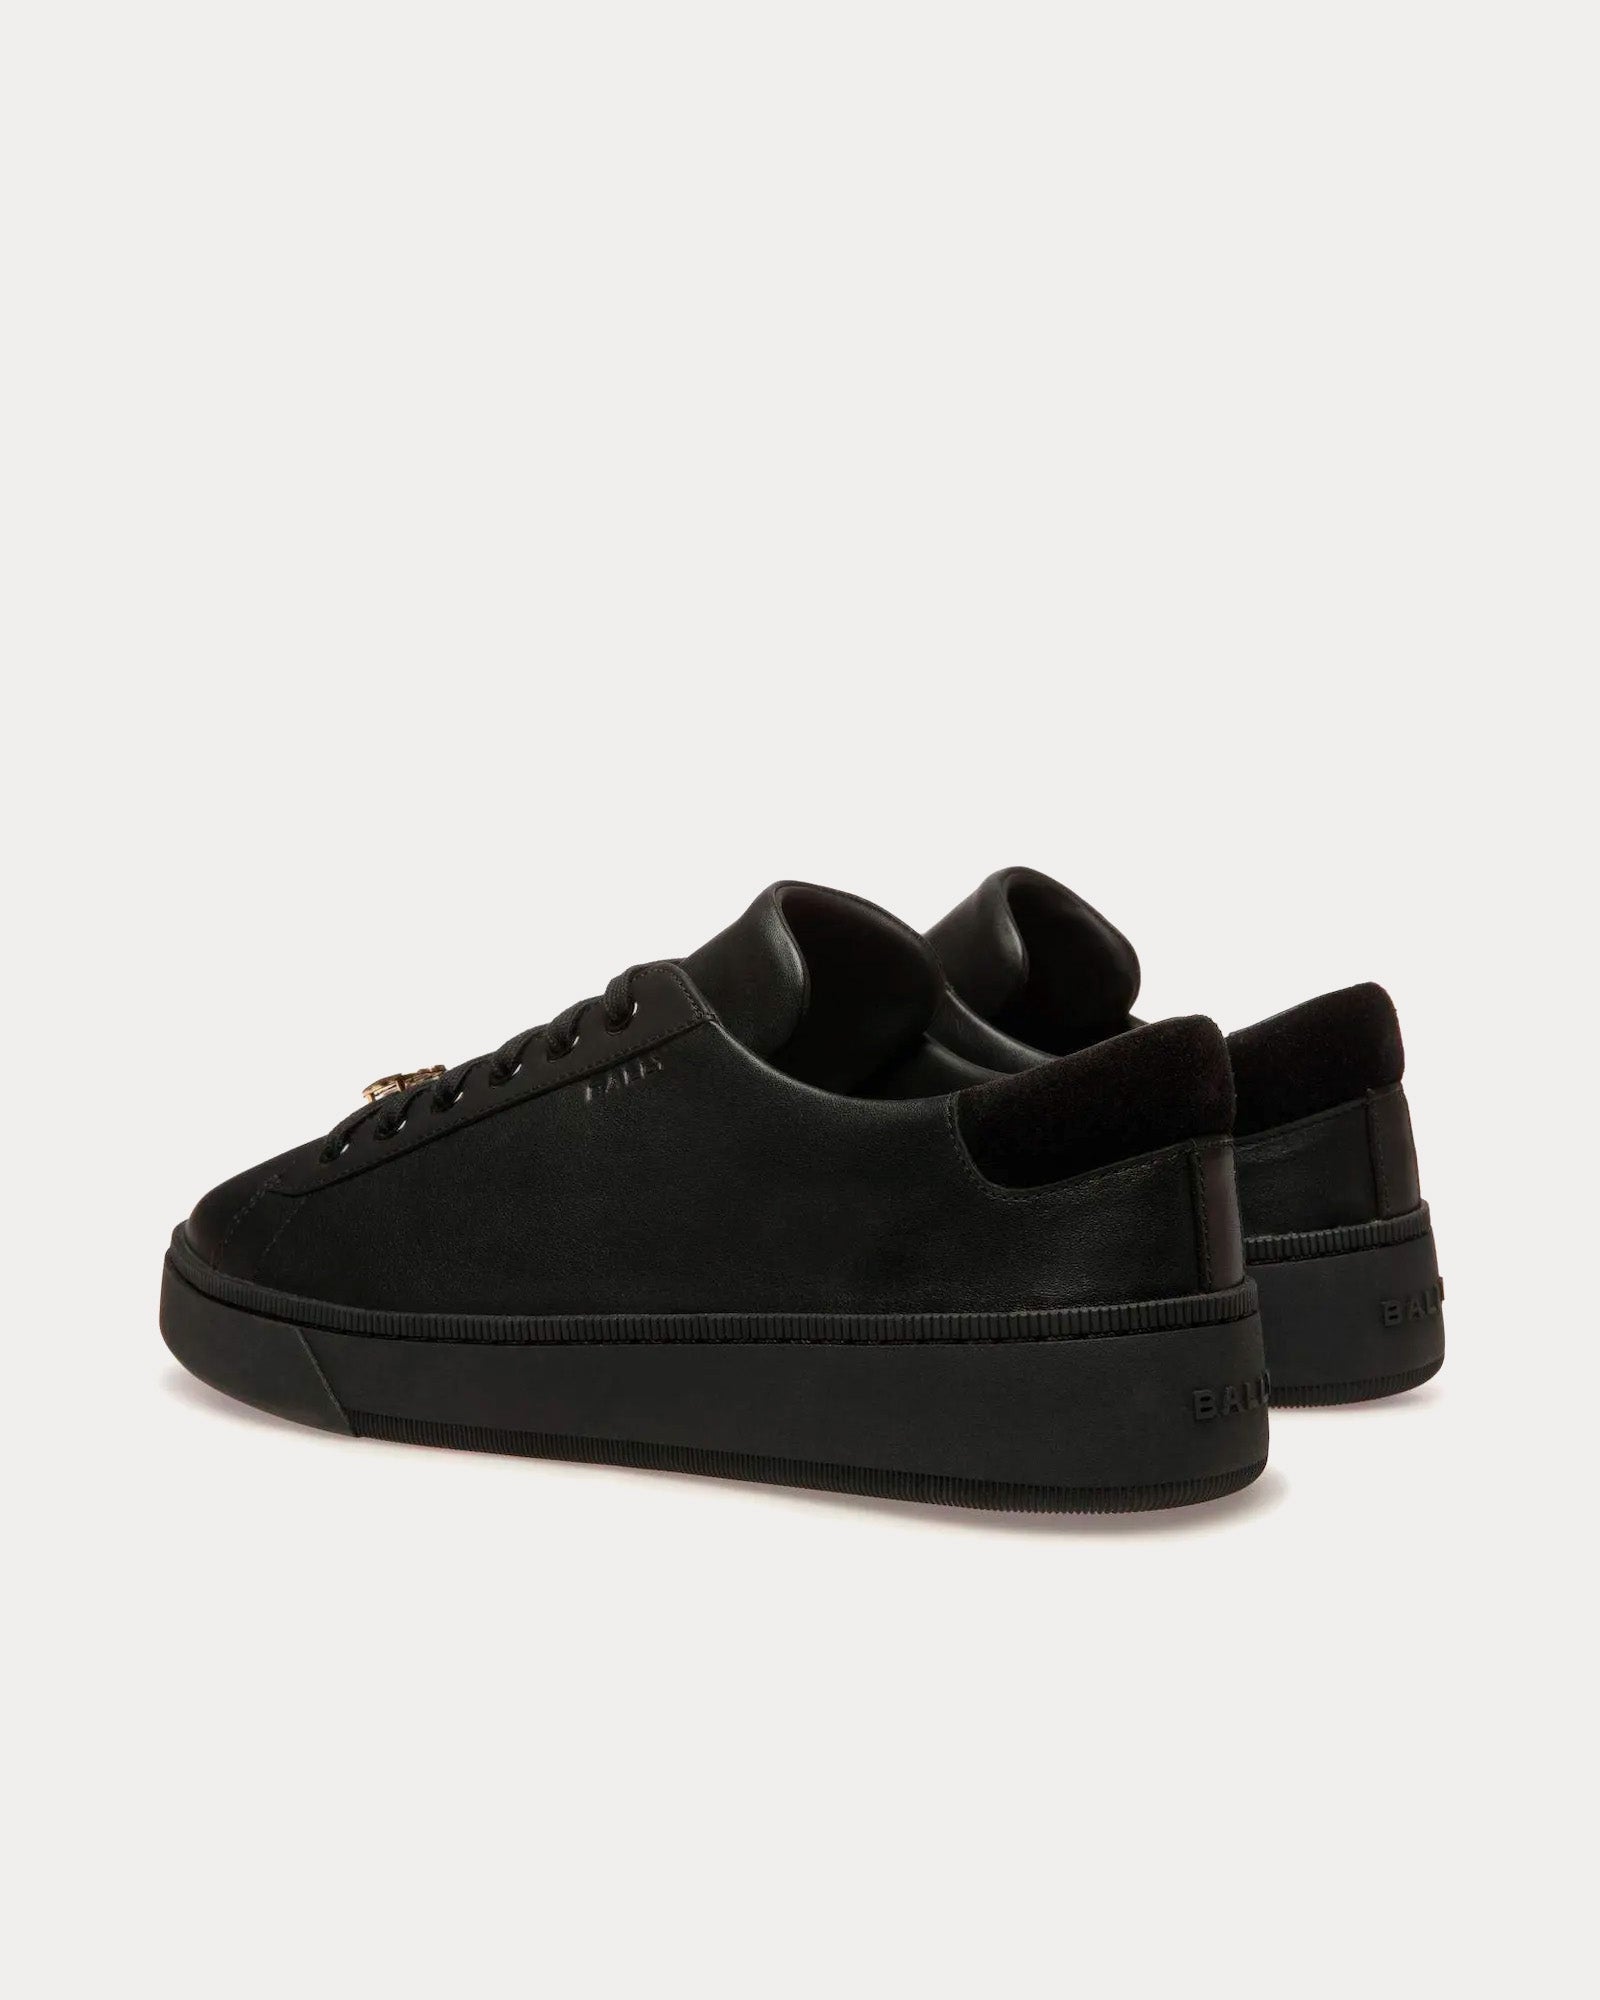 Bally - Raise Leather Black Low Top Sneakers